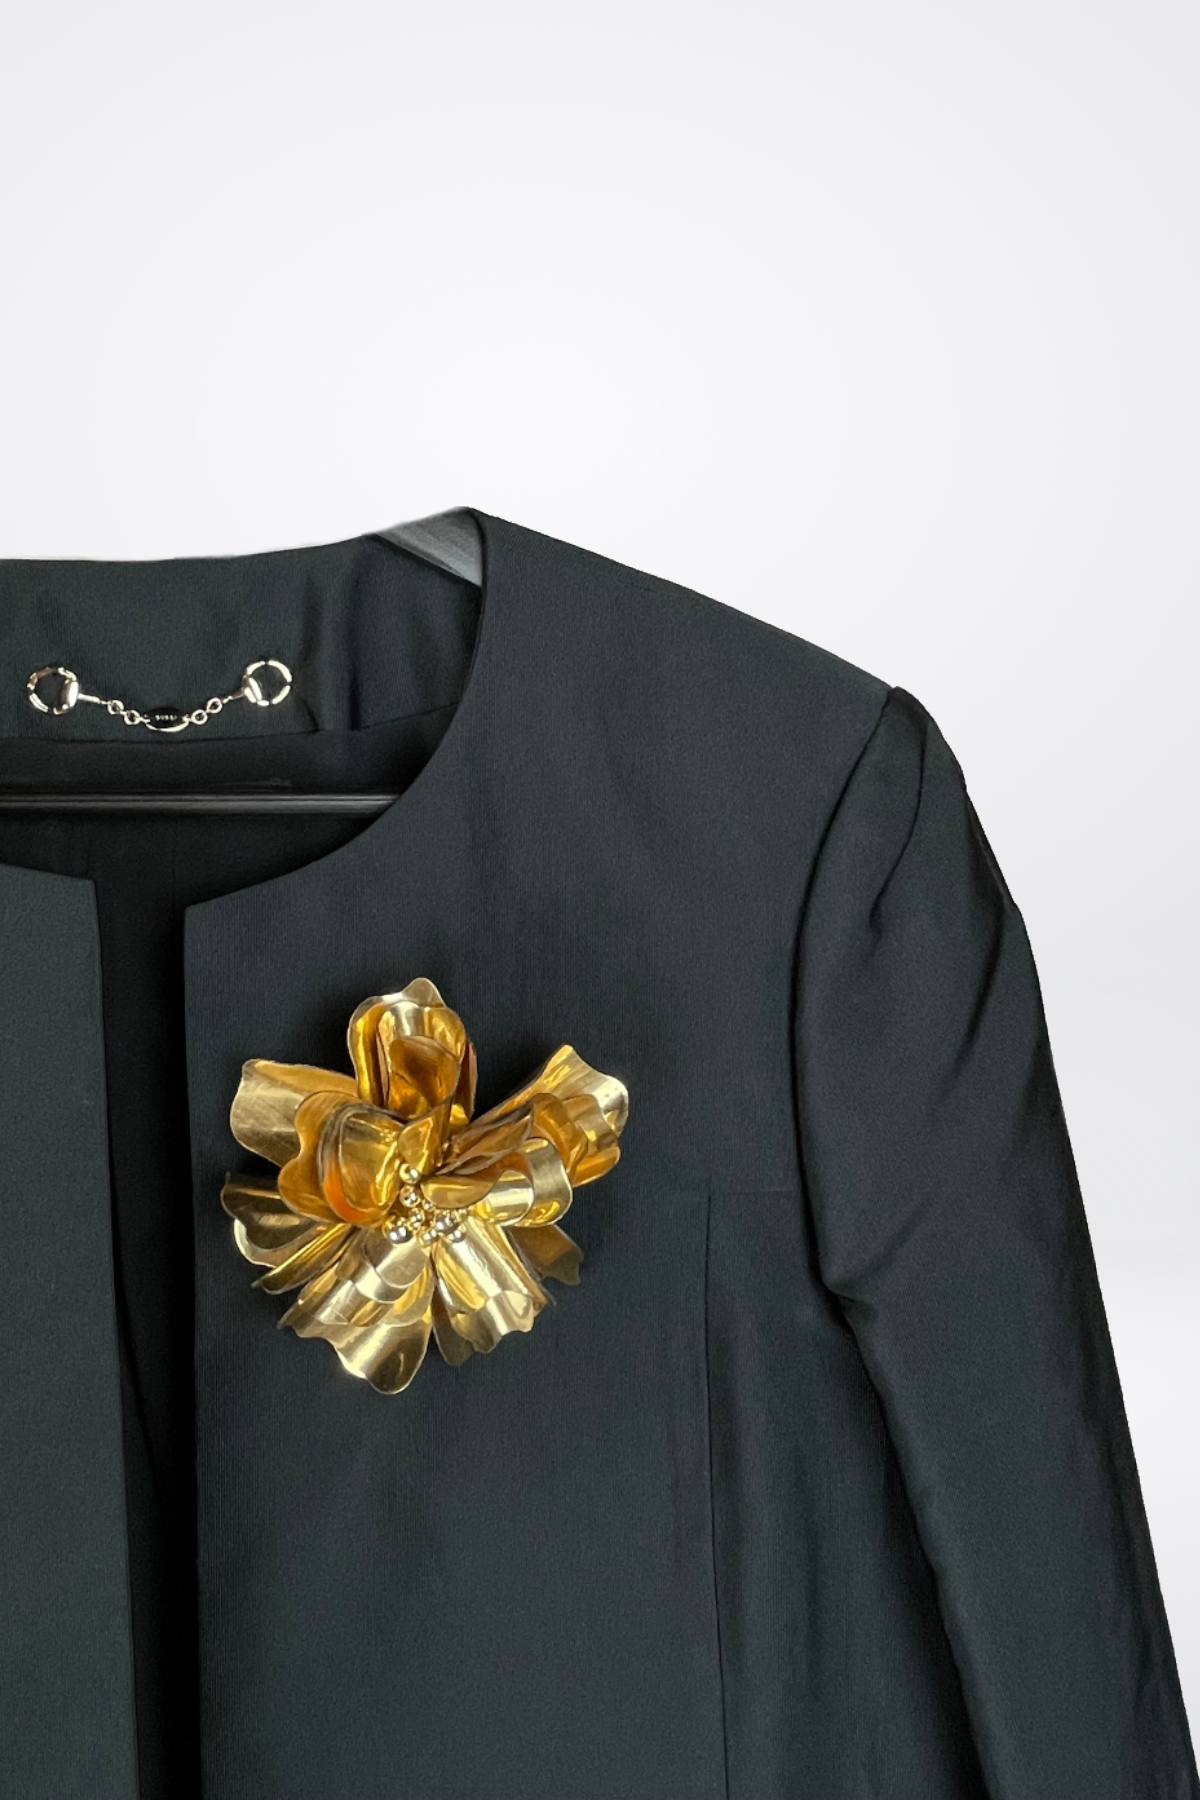 Gucci Cropped Collarless Jacket w/ Gold Metal Brooch